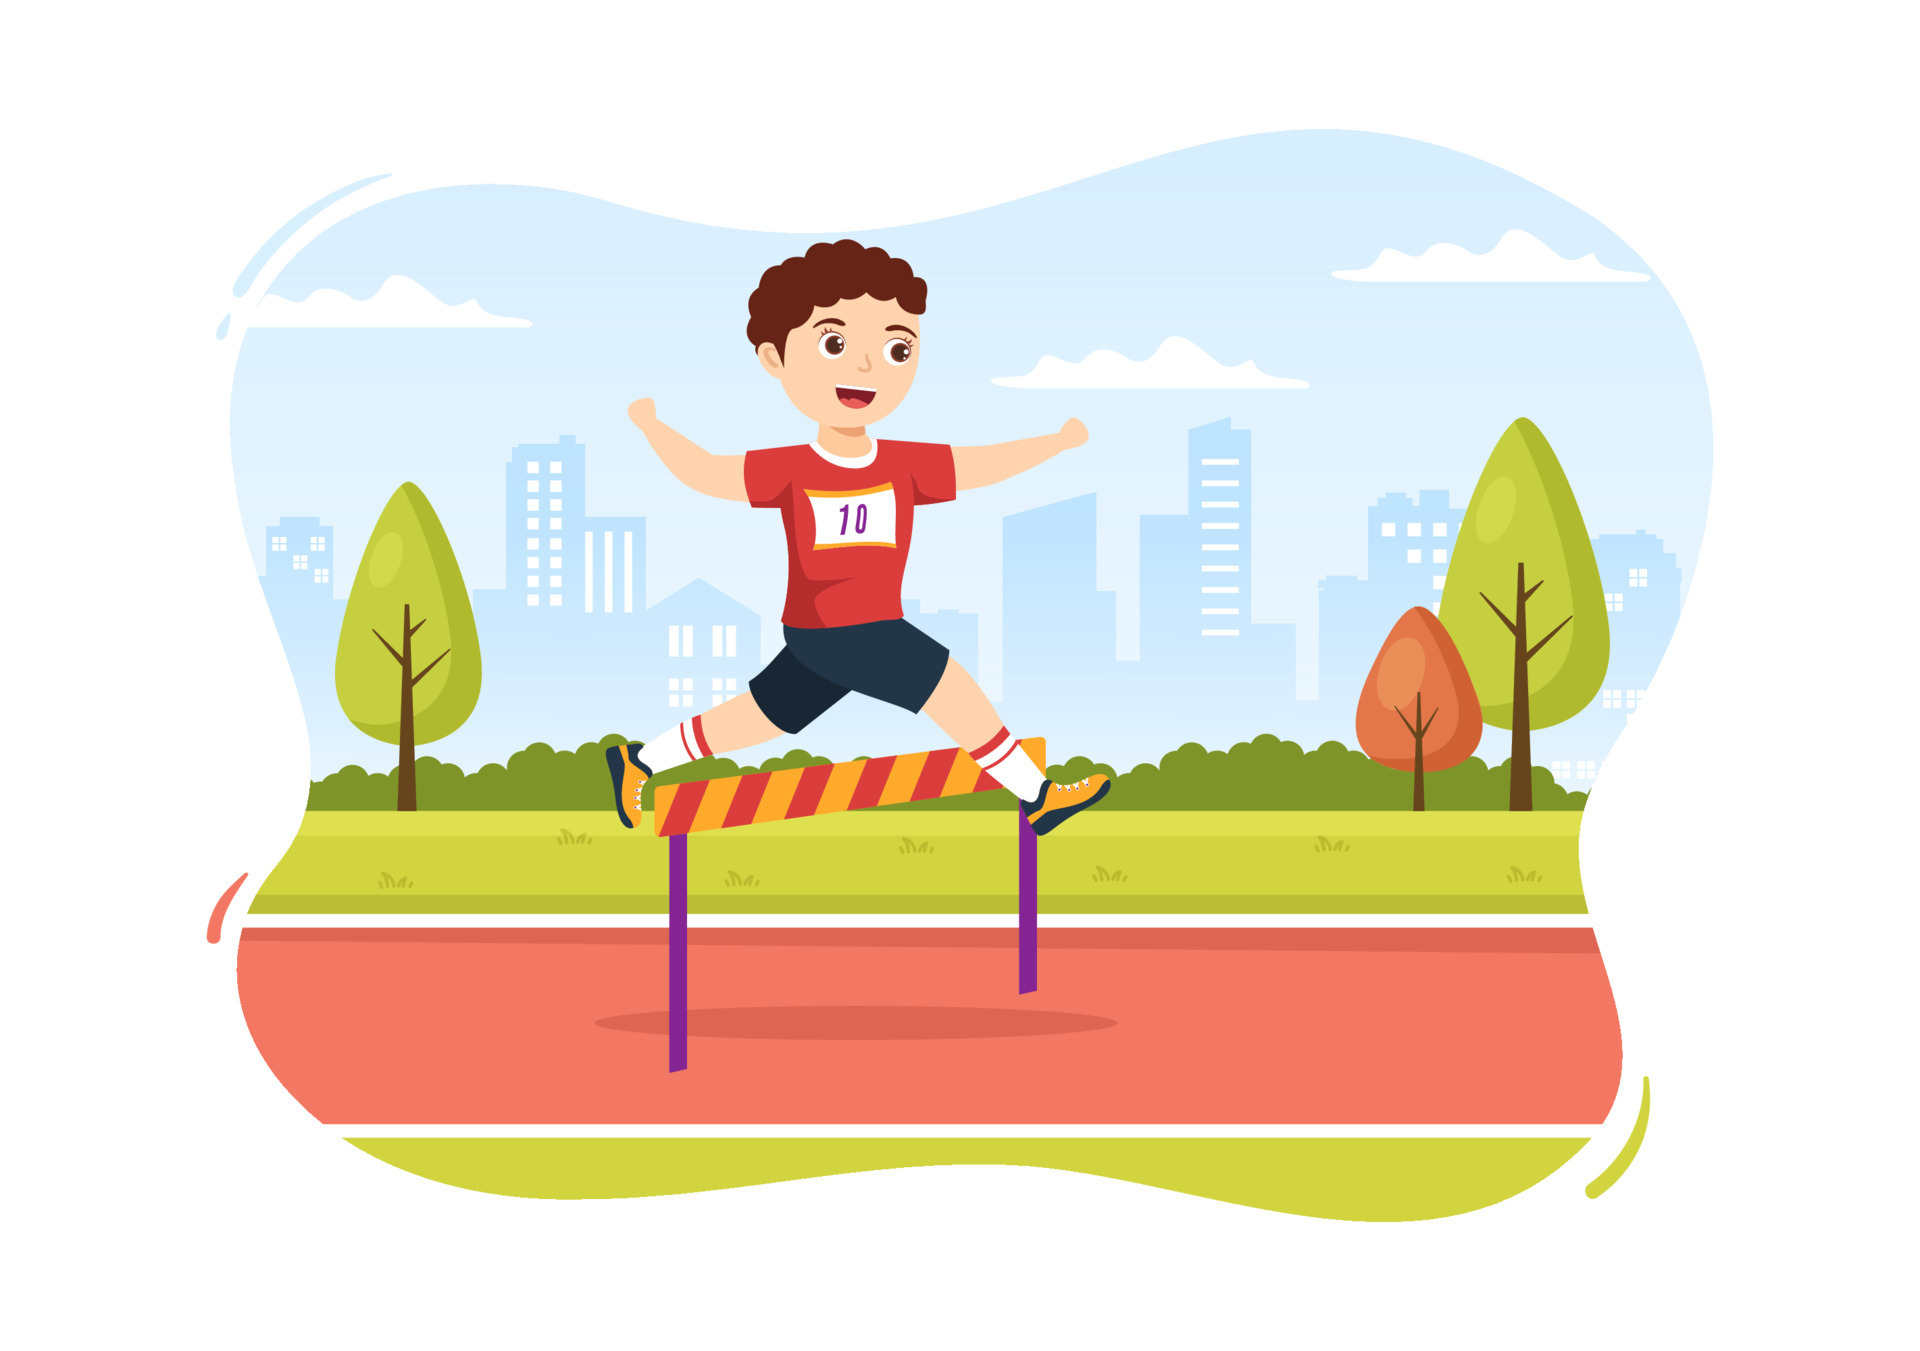 Kids Athlete Run Hurdle Long Jump Sportsman Game Illustration in Obstacle  Running for Web Banner or Landing Page in Cartoon Hand Drawn Templates  17346302 Vector Art at Vecteezy